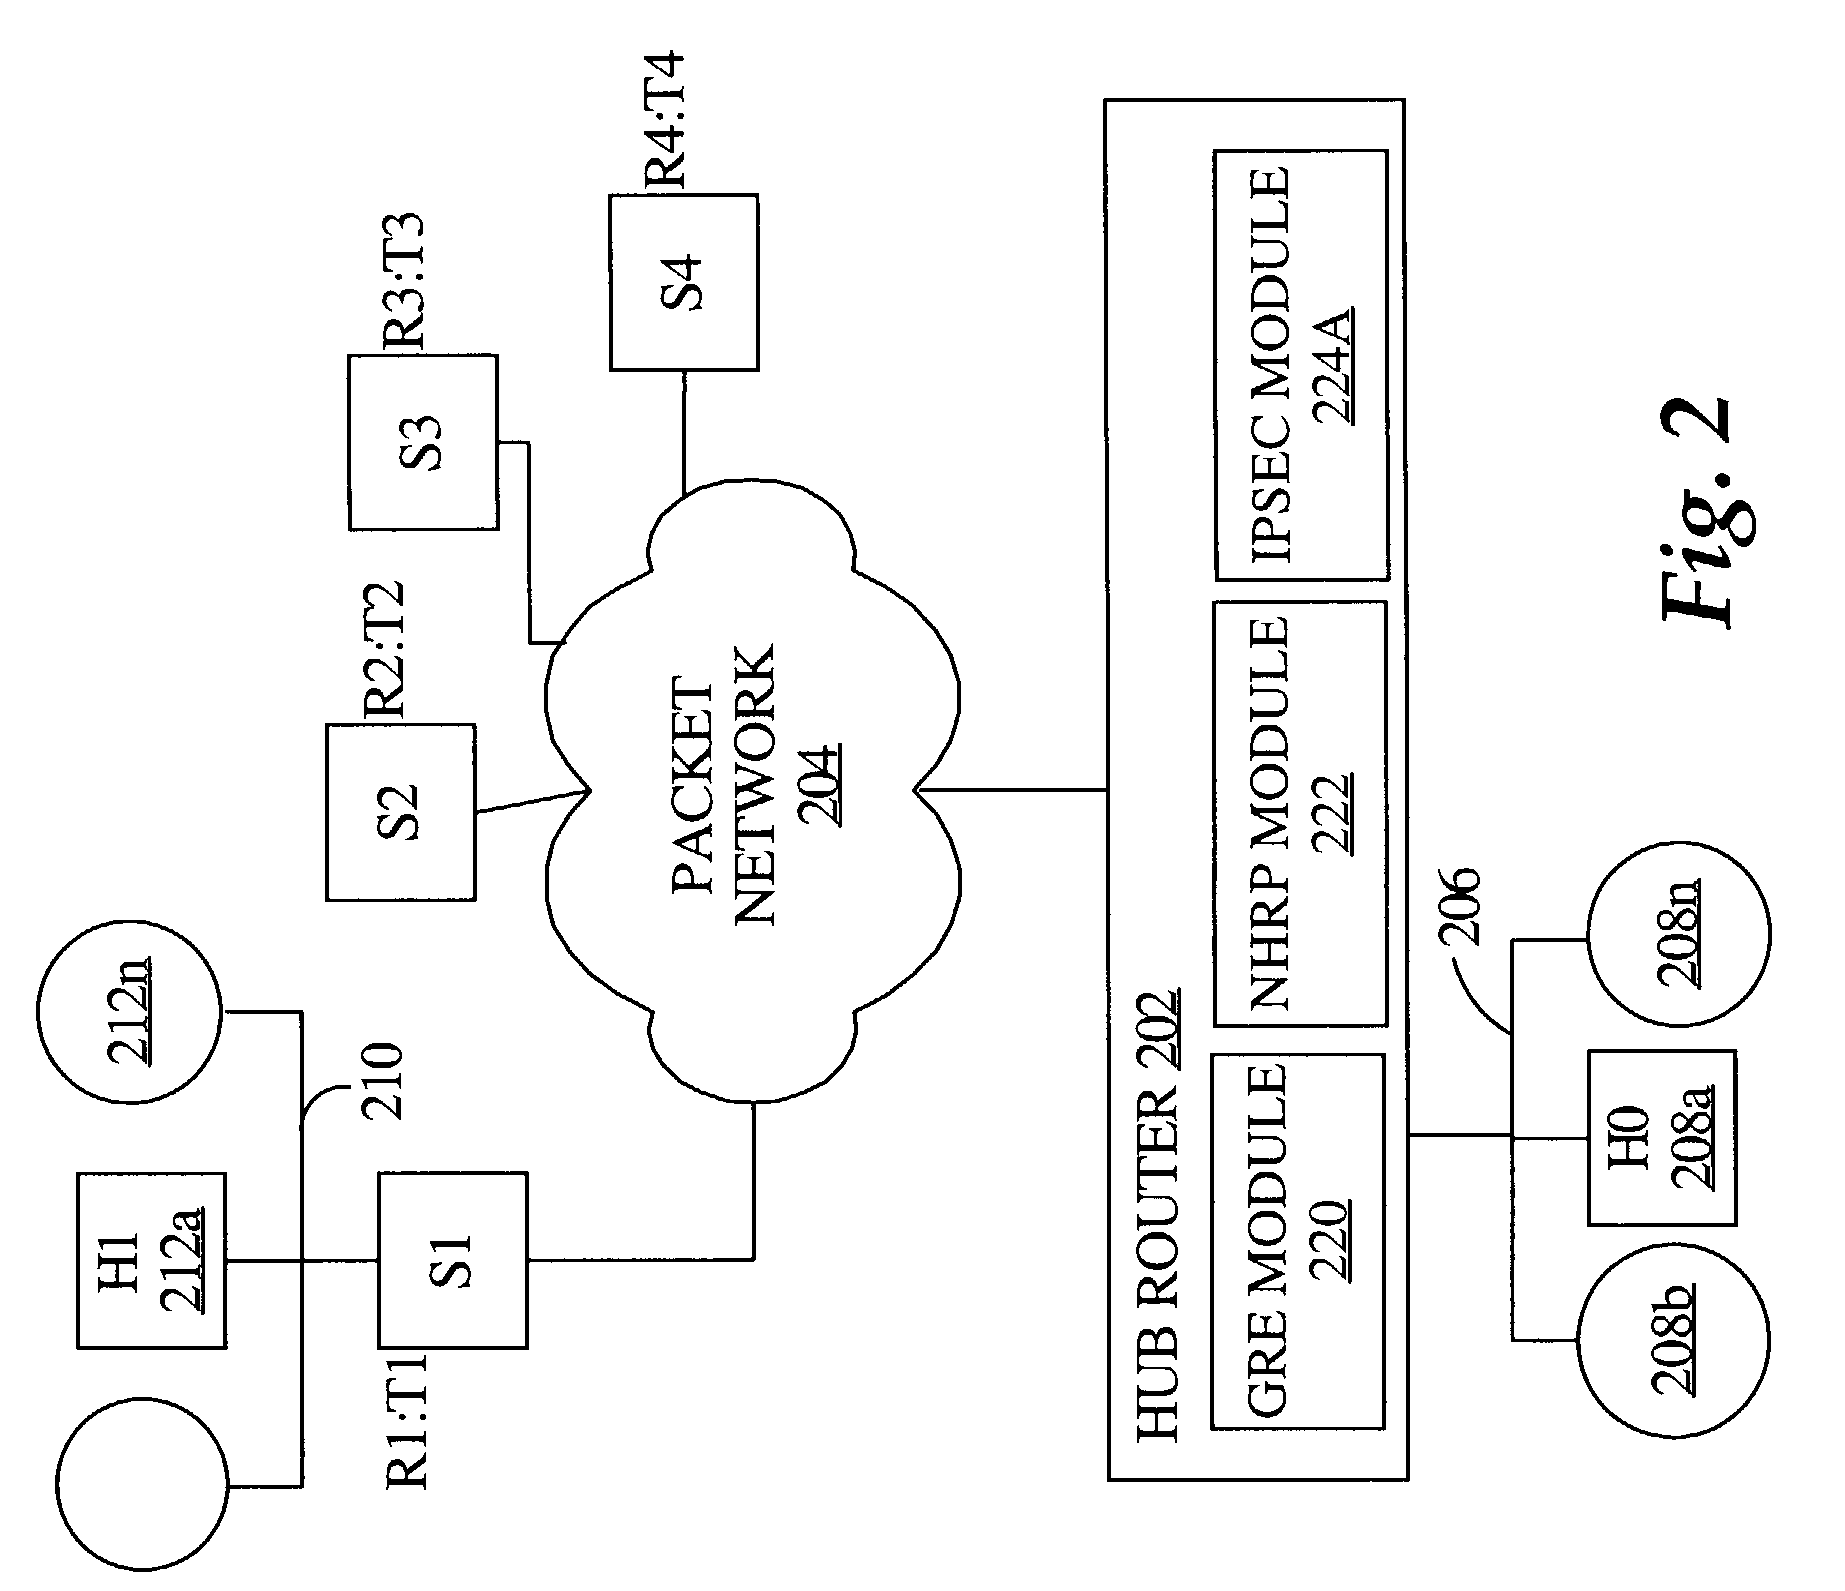 Method and apparatus for dynamically securing voice and other delay-sensitive network traffic